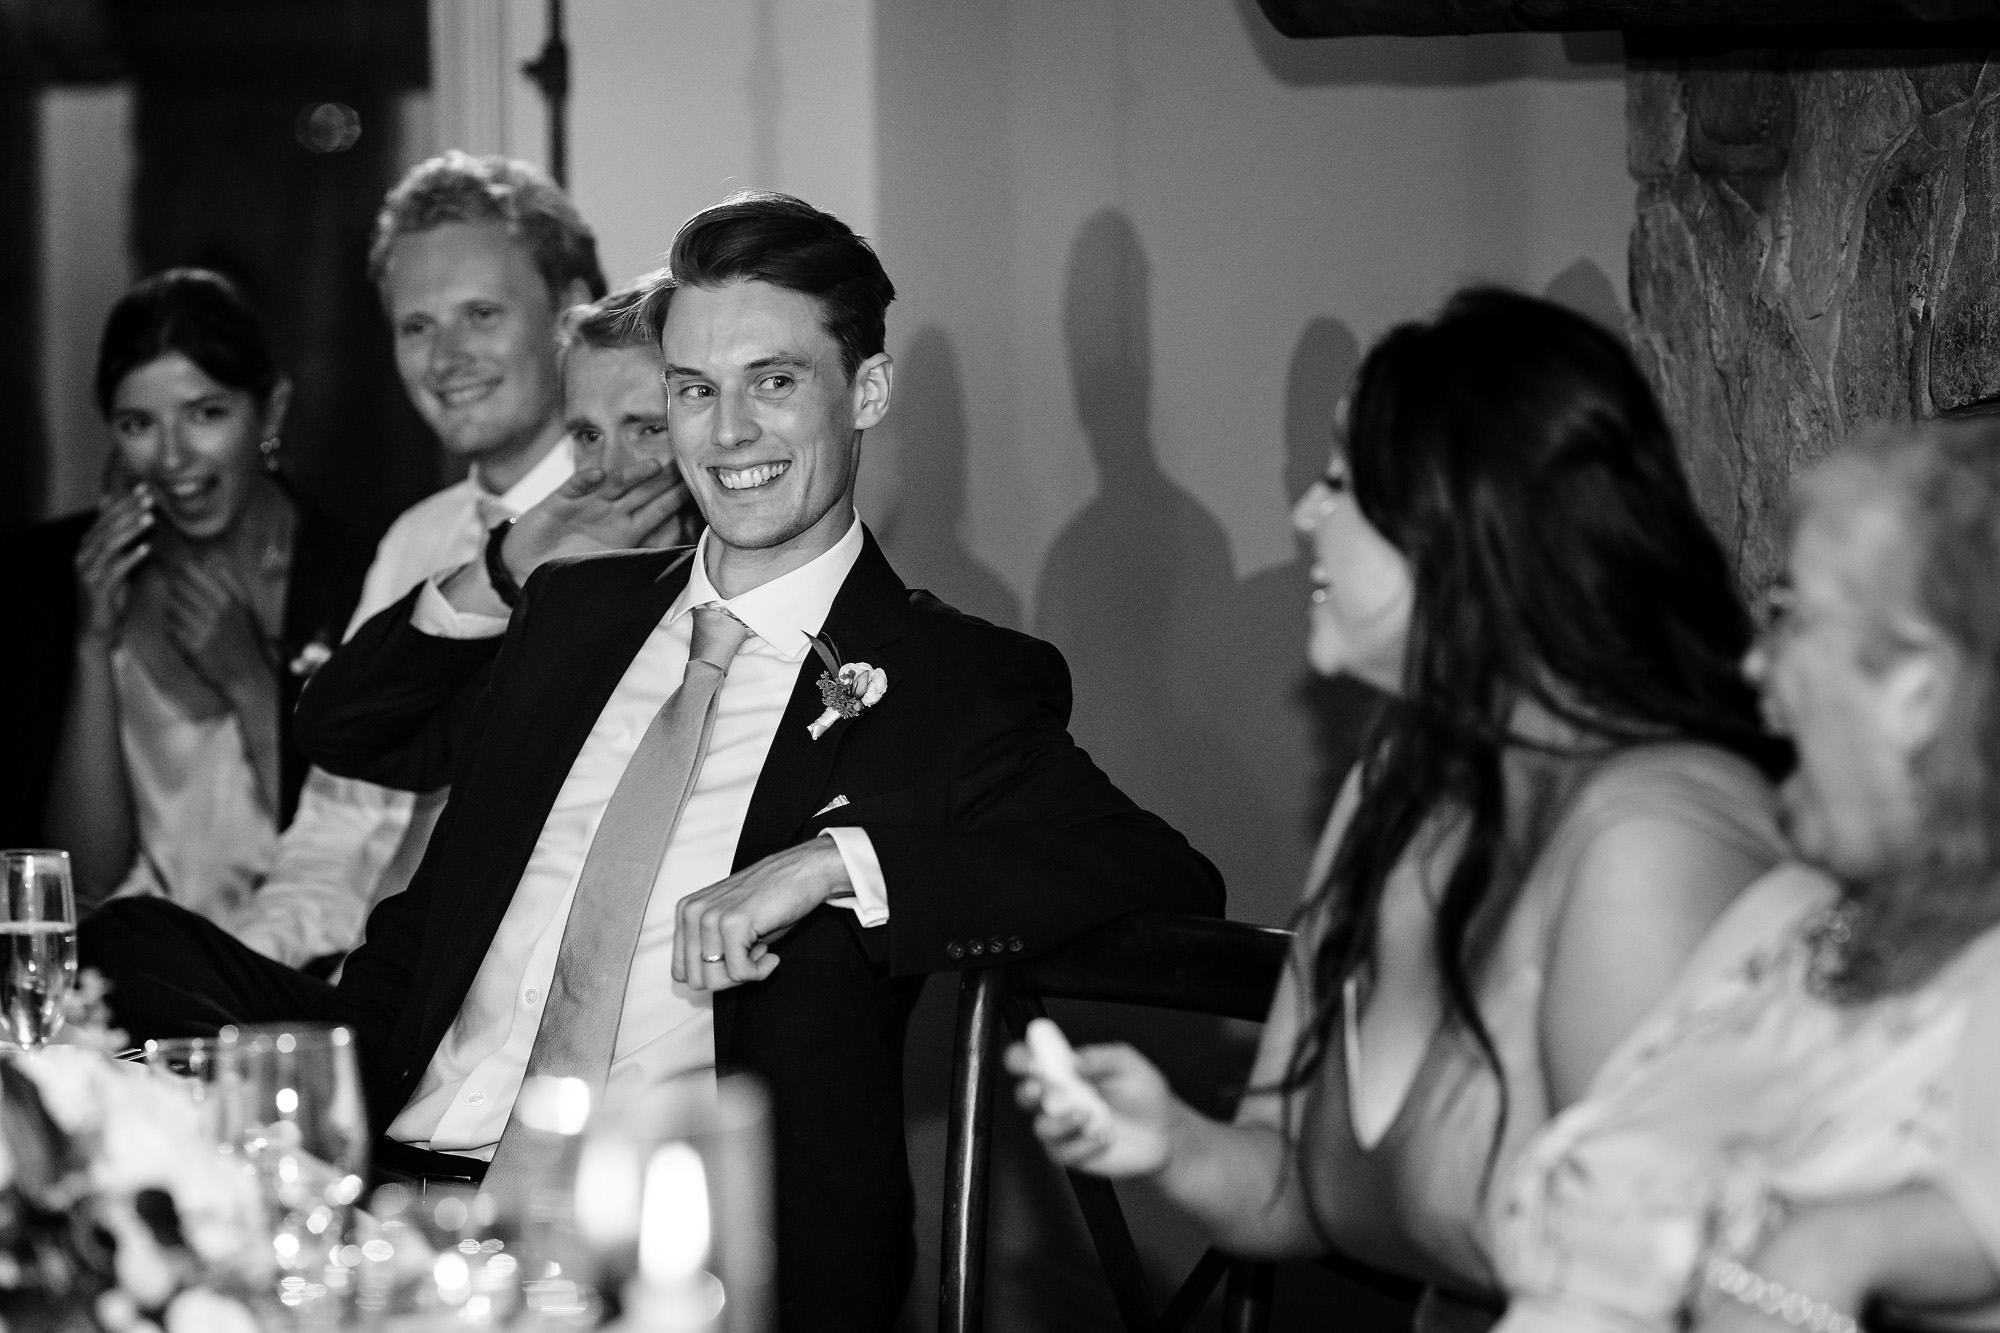 The groom laughs during a toast